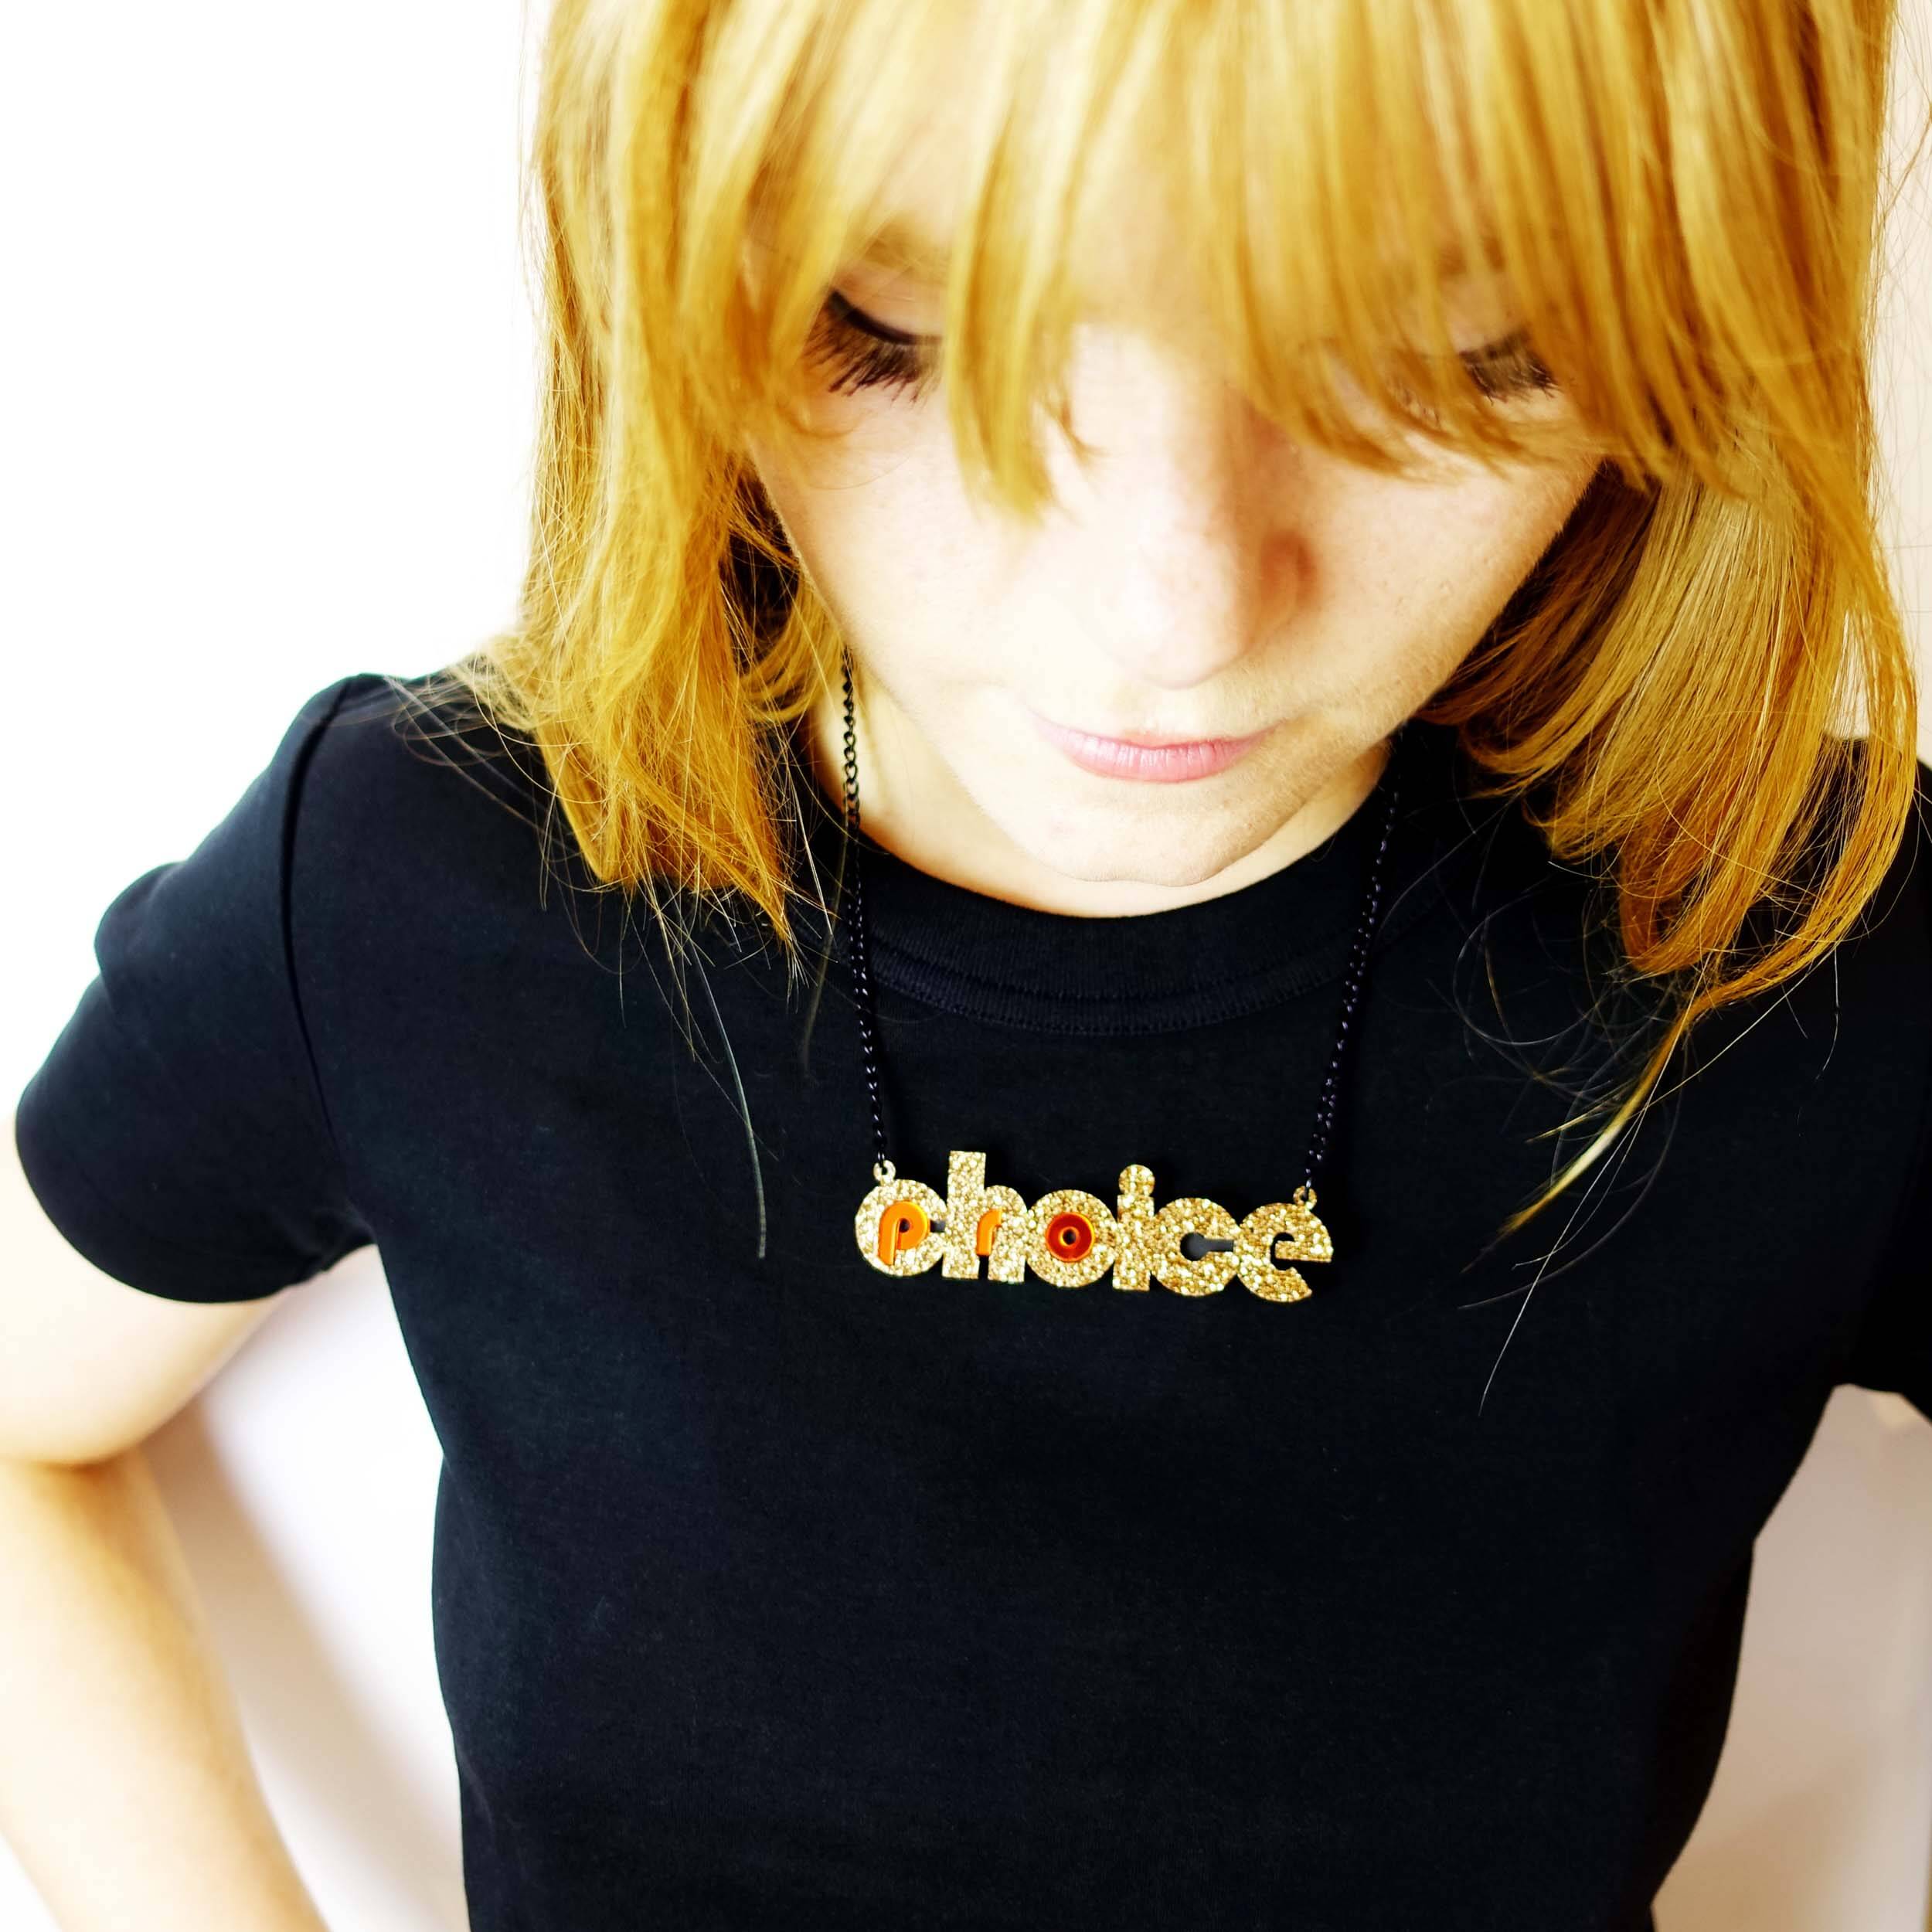 Model wears gold glitter pro-choice necklace, designed by Sarah Day for Wear and Resist. 